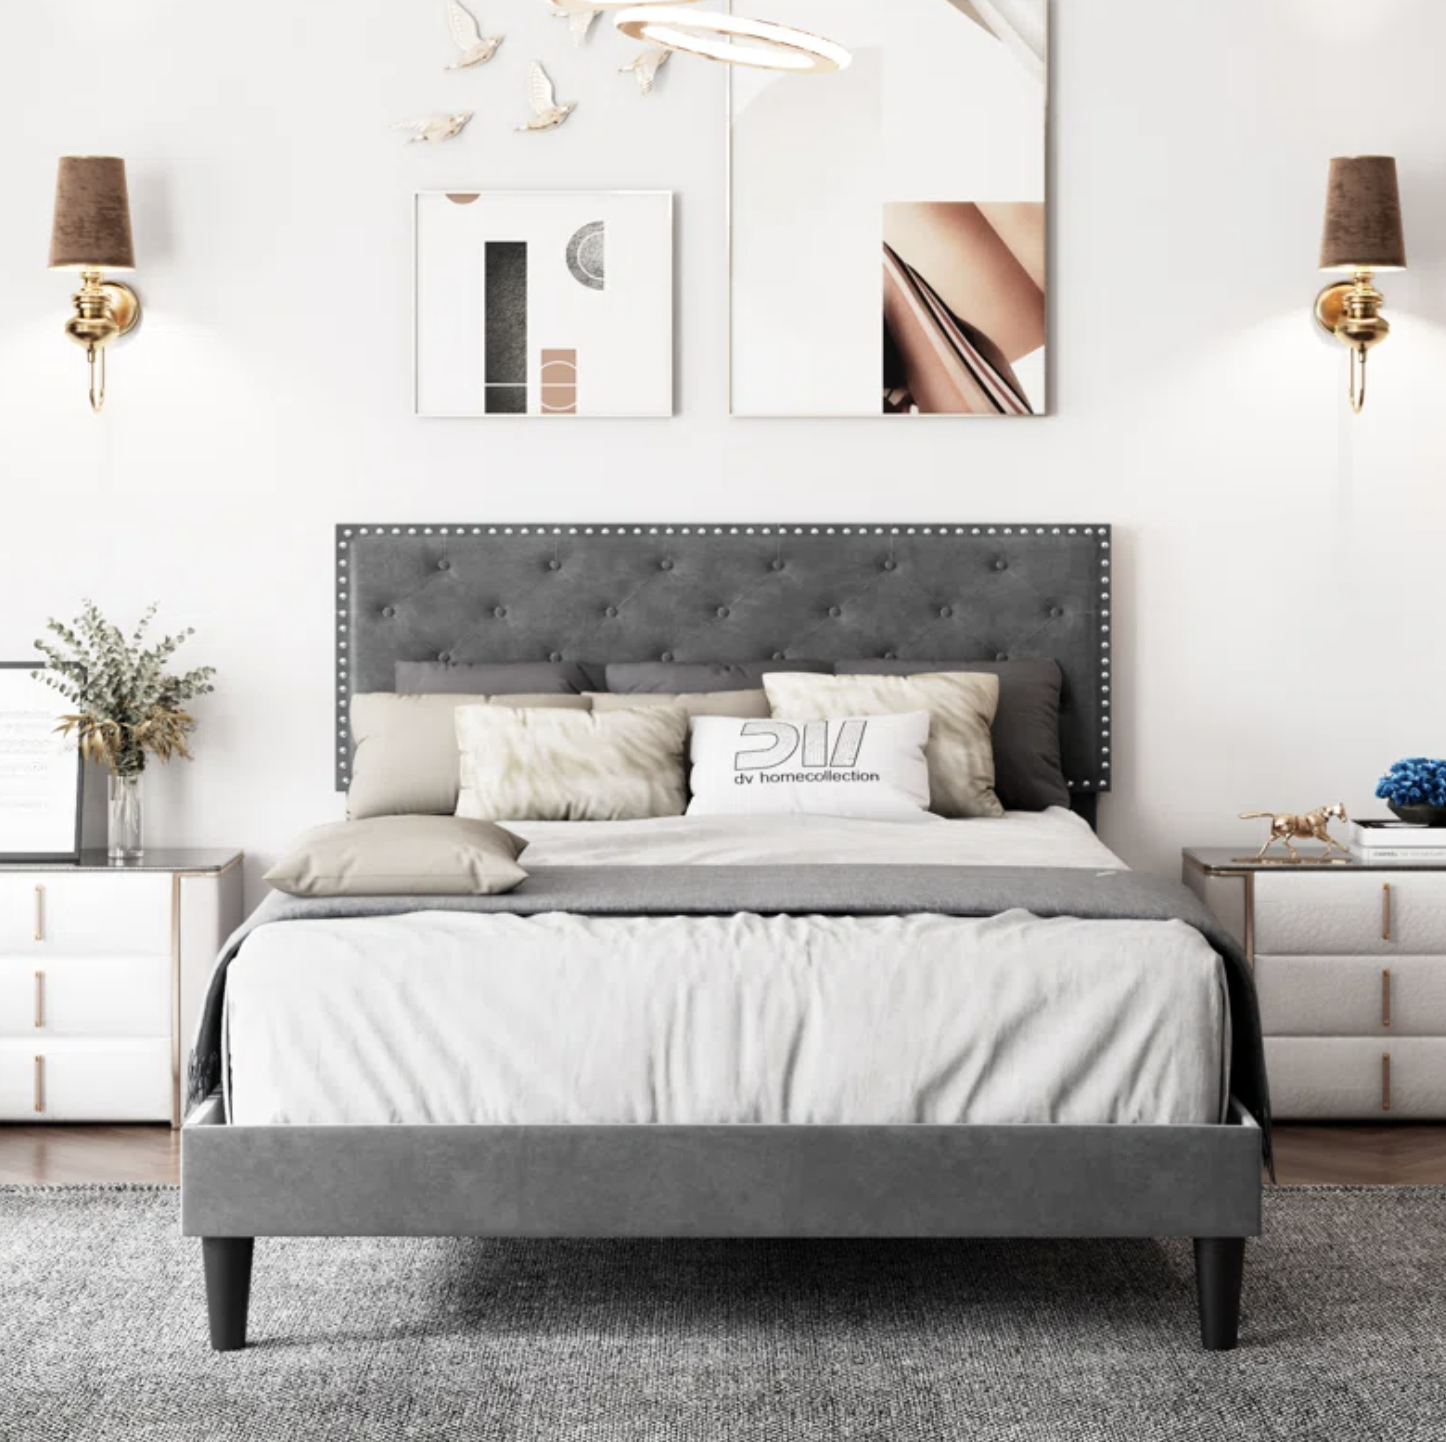 A modern bedroom with an upholstered bed, two nightstands, artwork, and decorative lighting for a sleek look